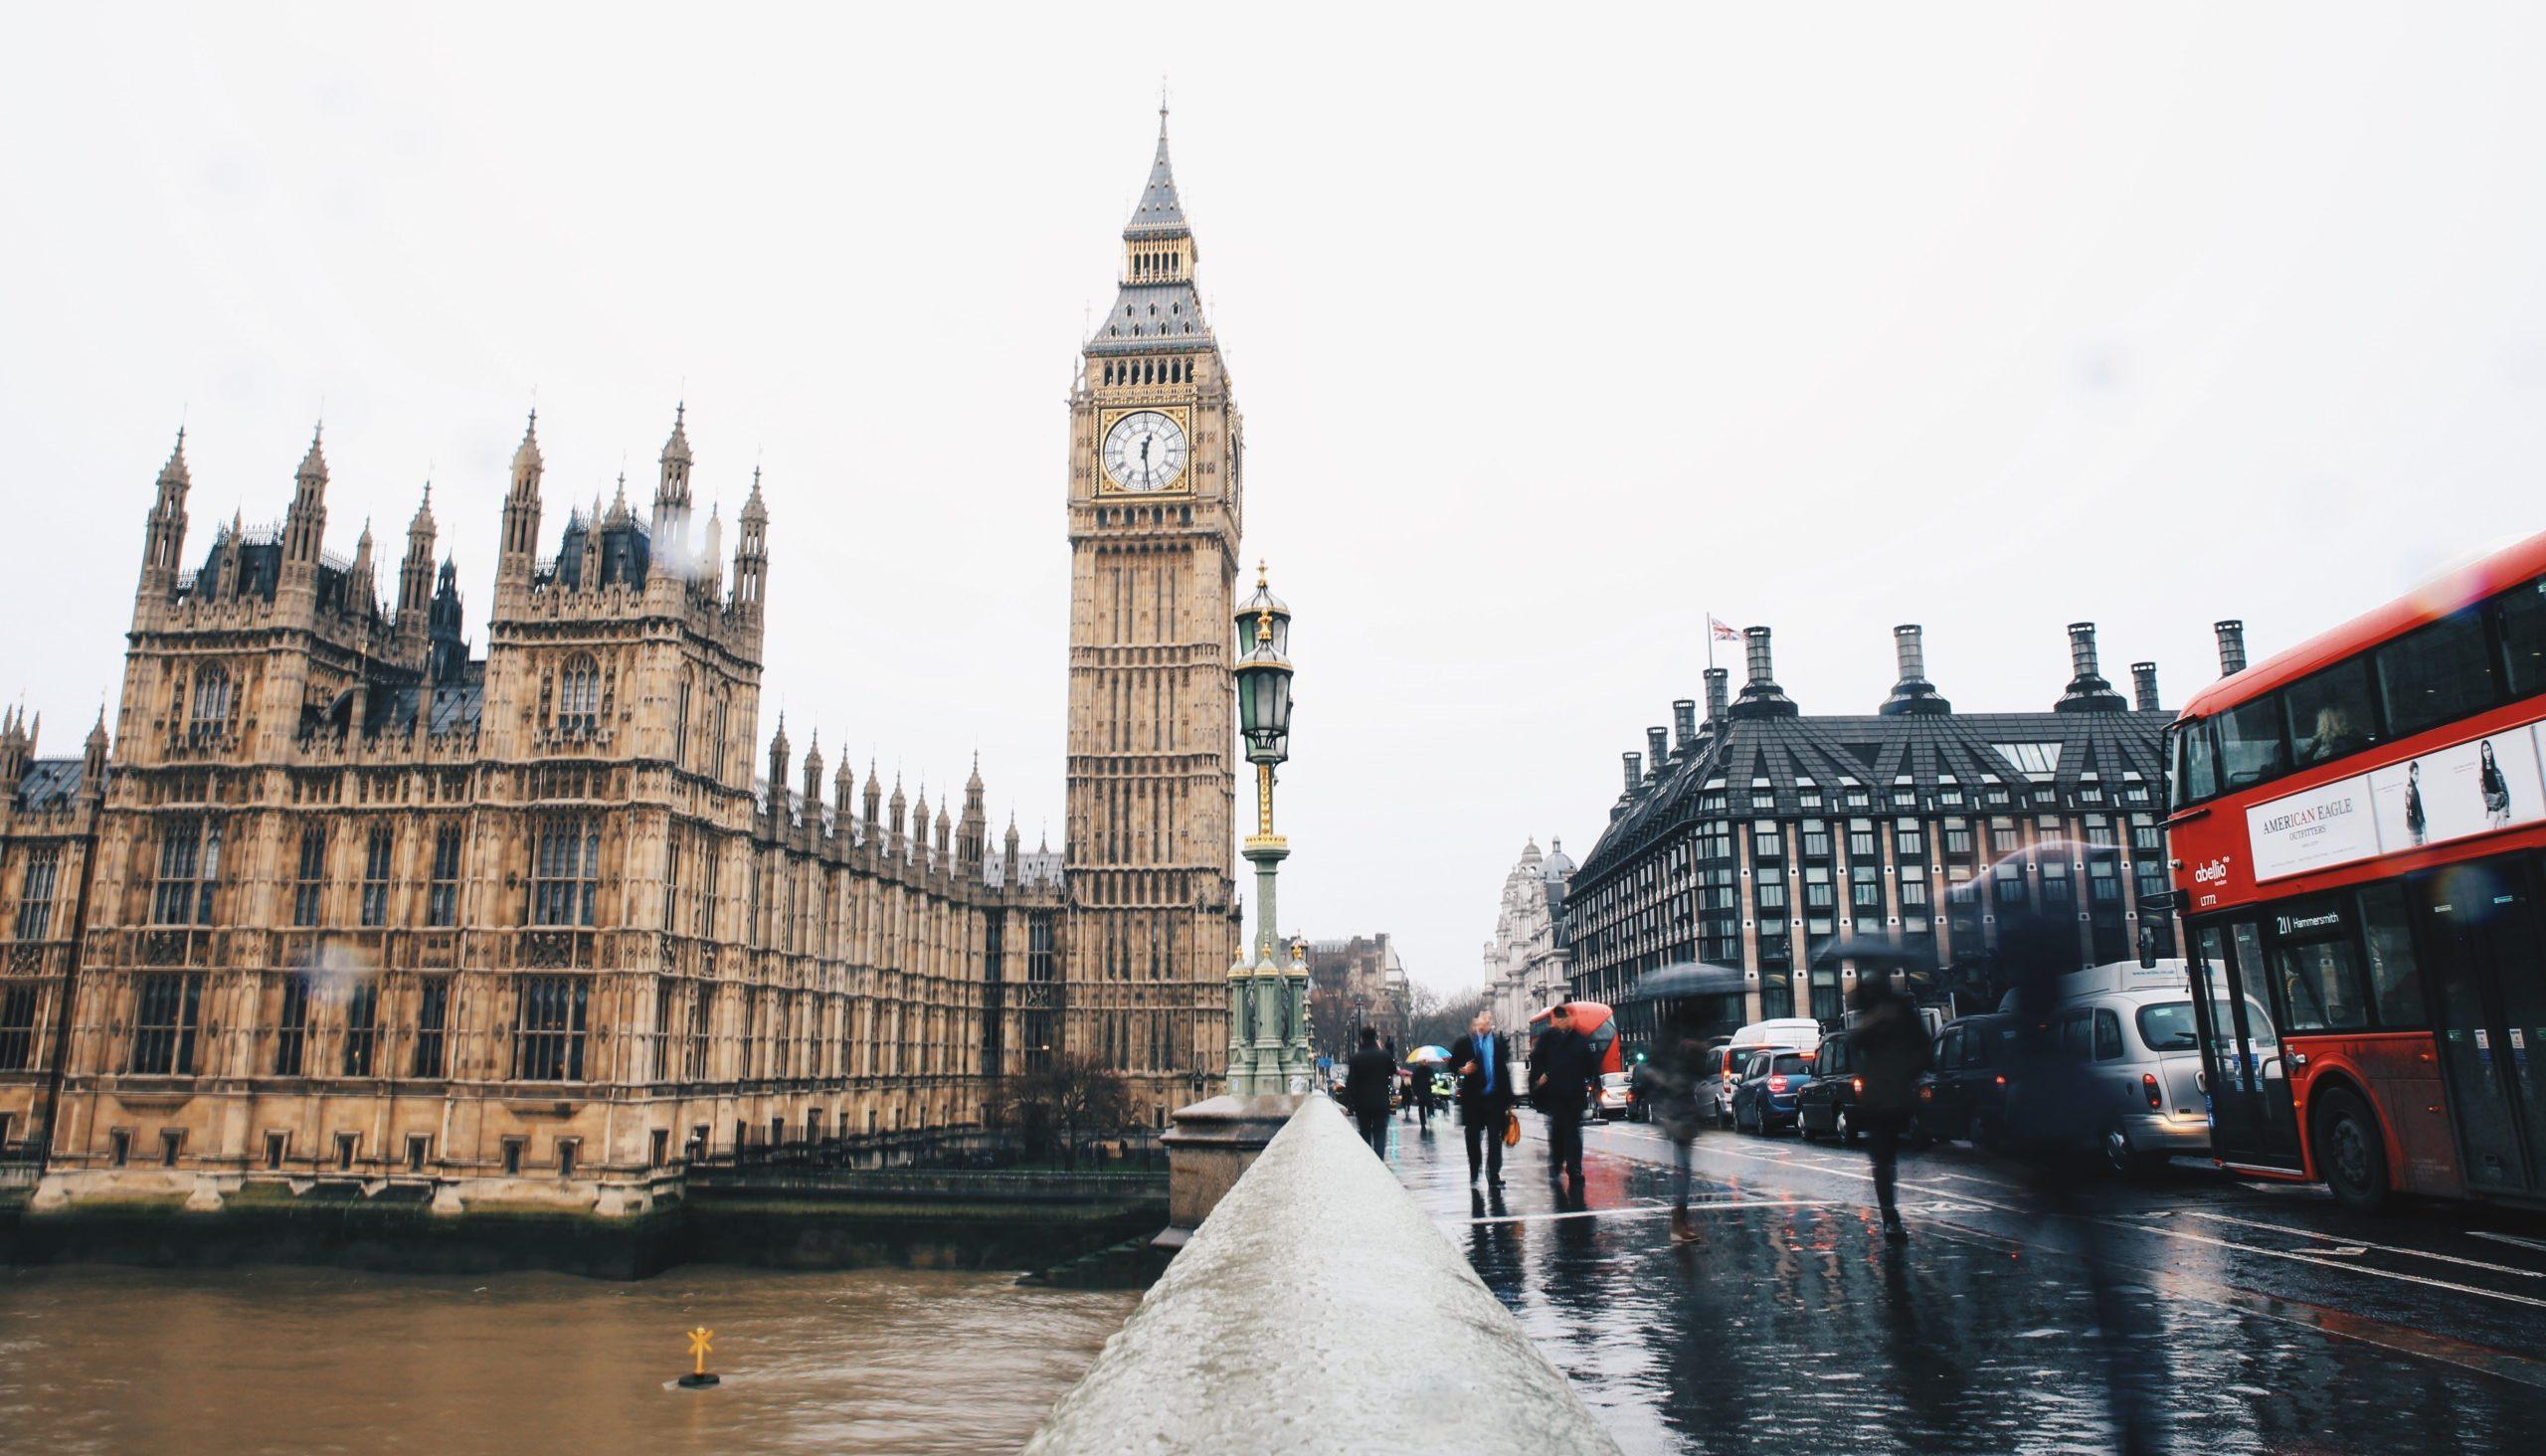 Big Ben, London on a drizzly day.